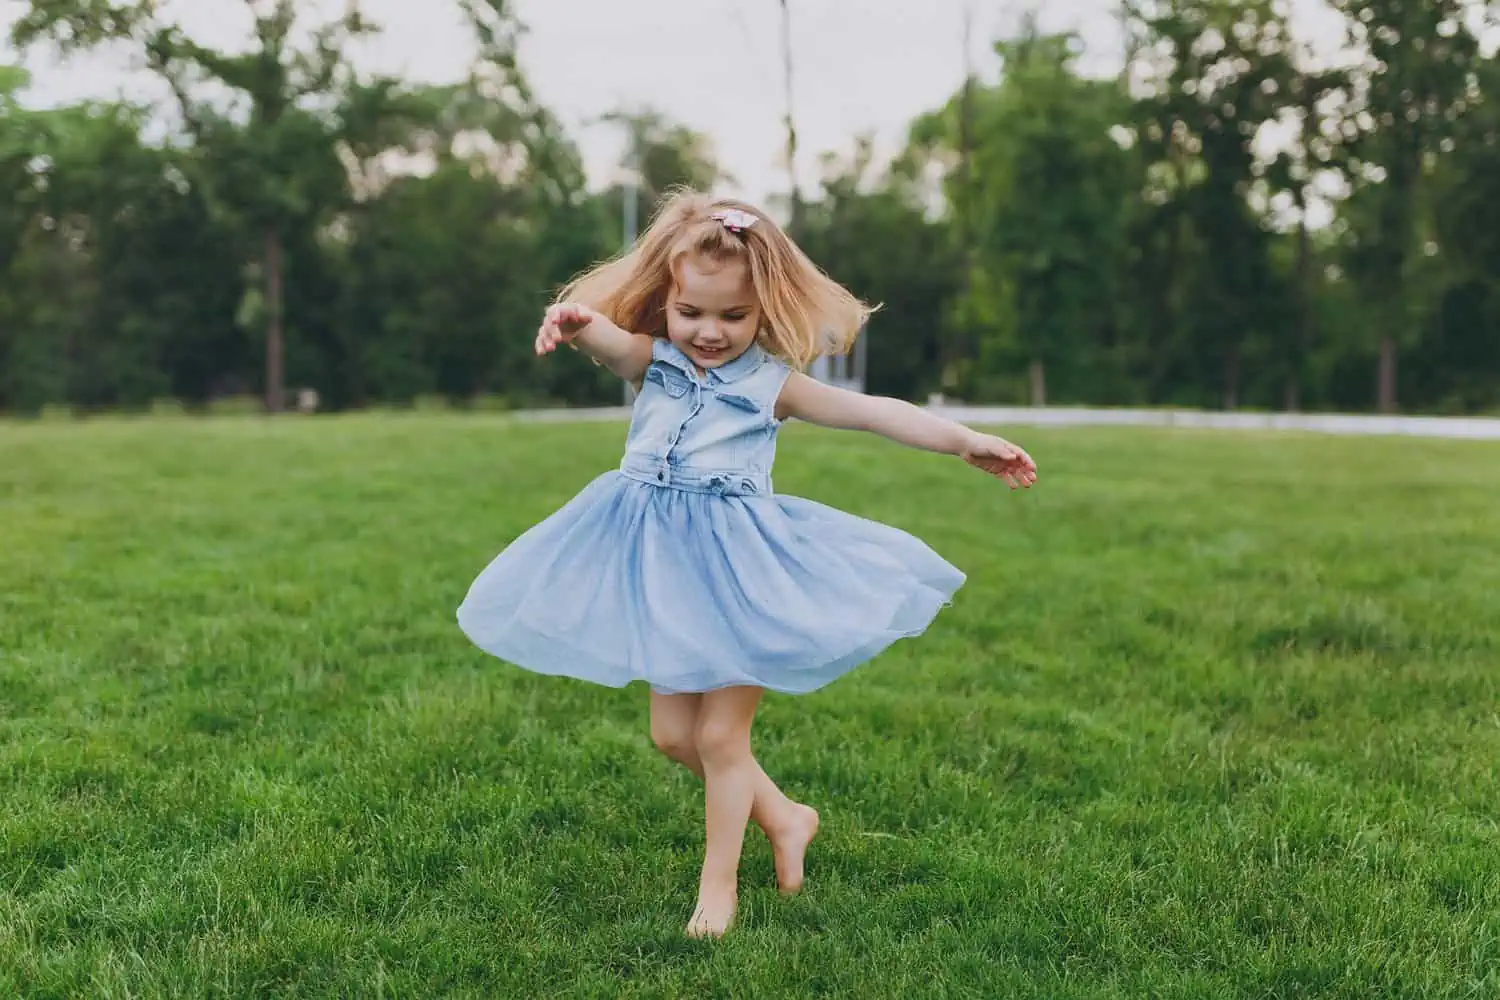 Adorable baby girl in denim dress circling around on green grass law